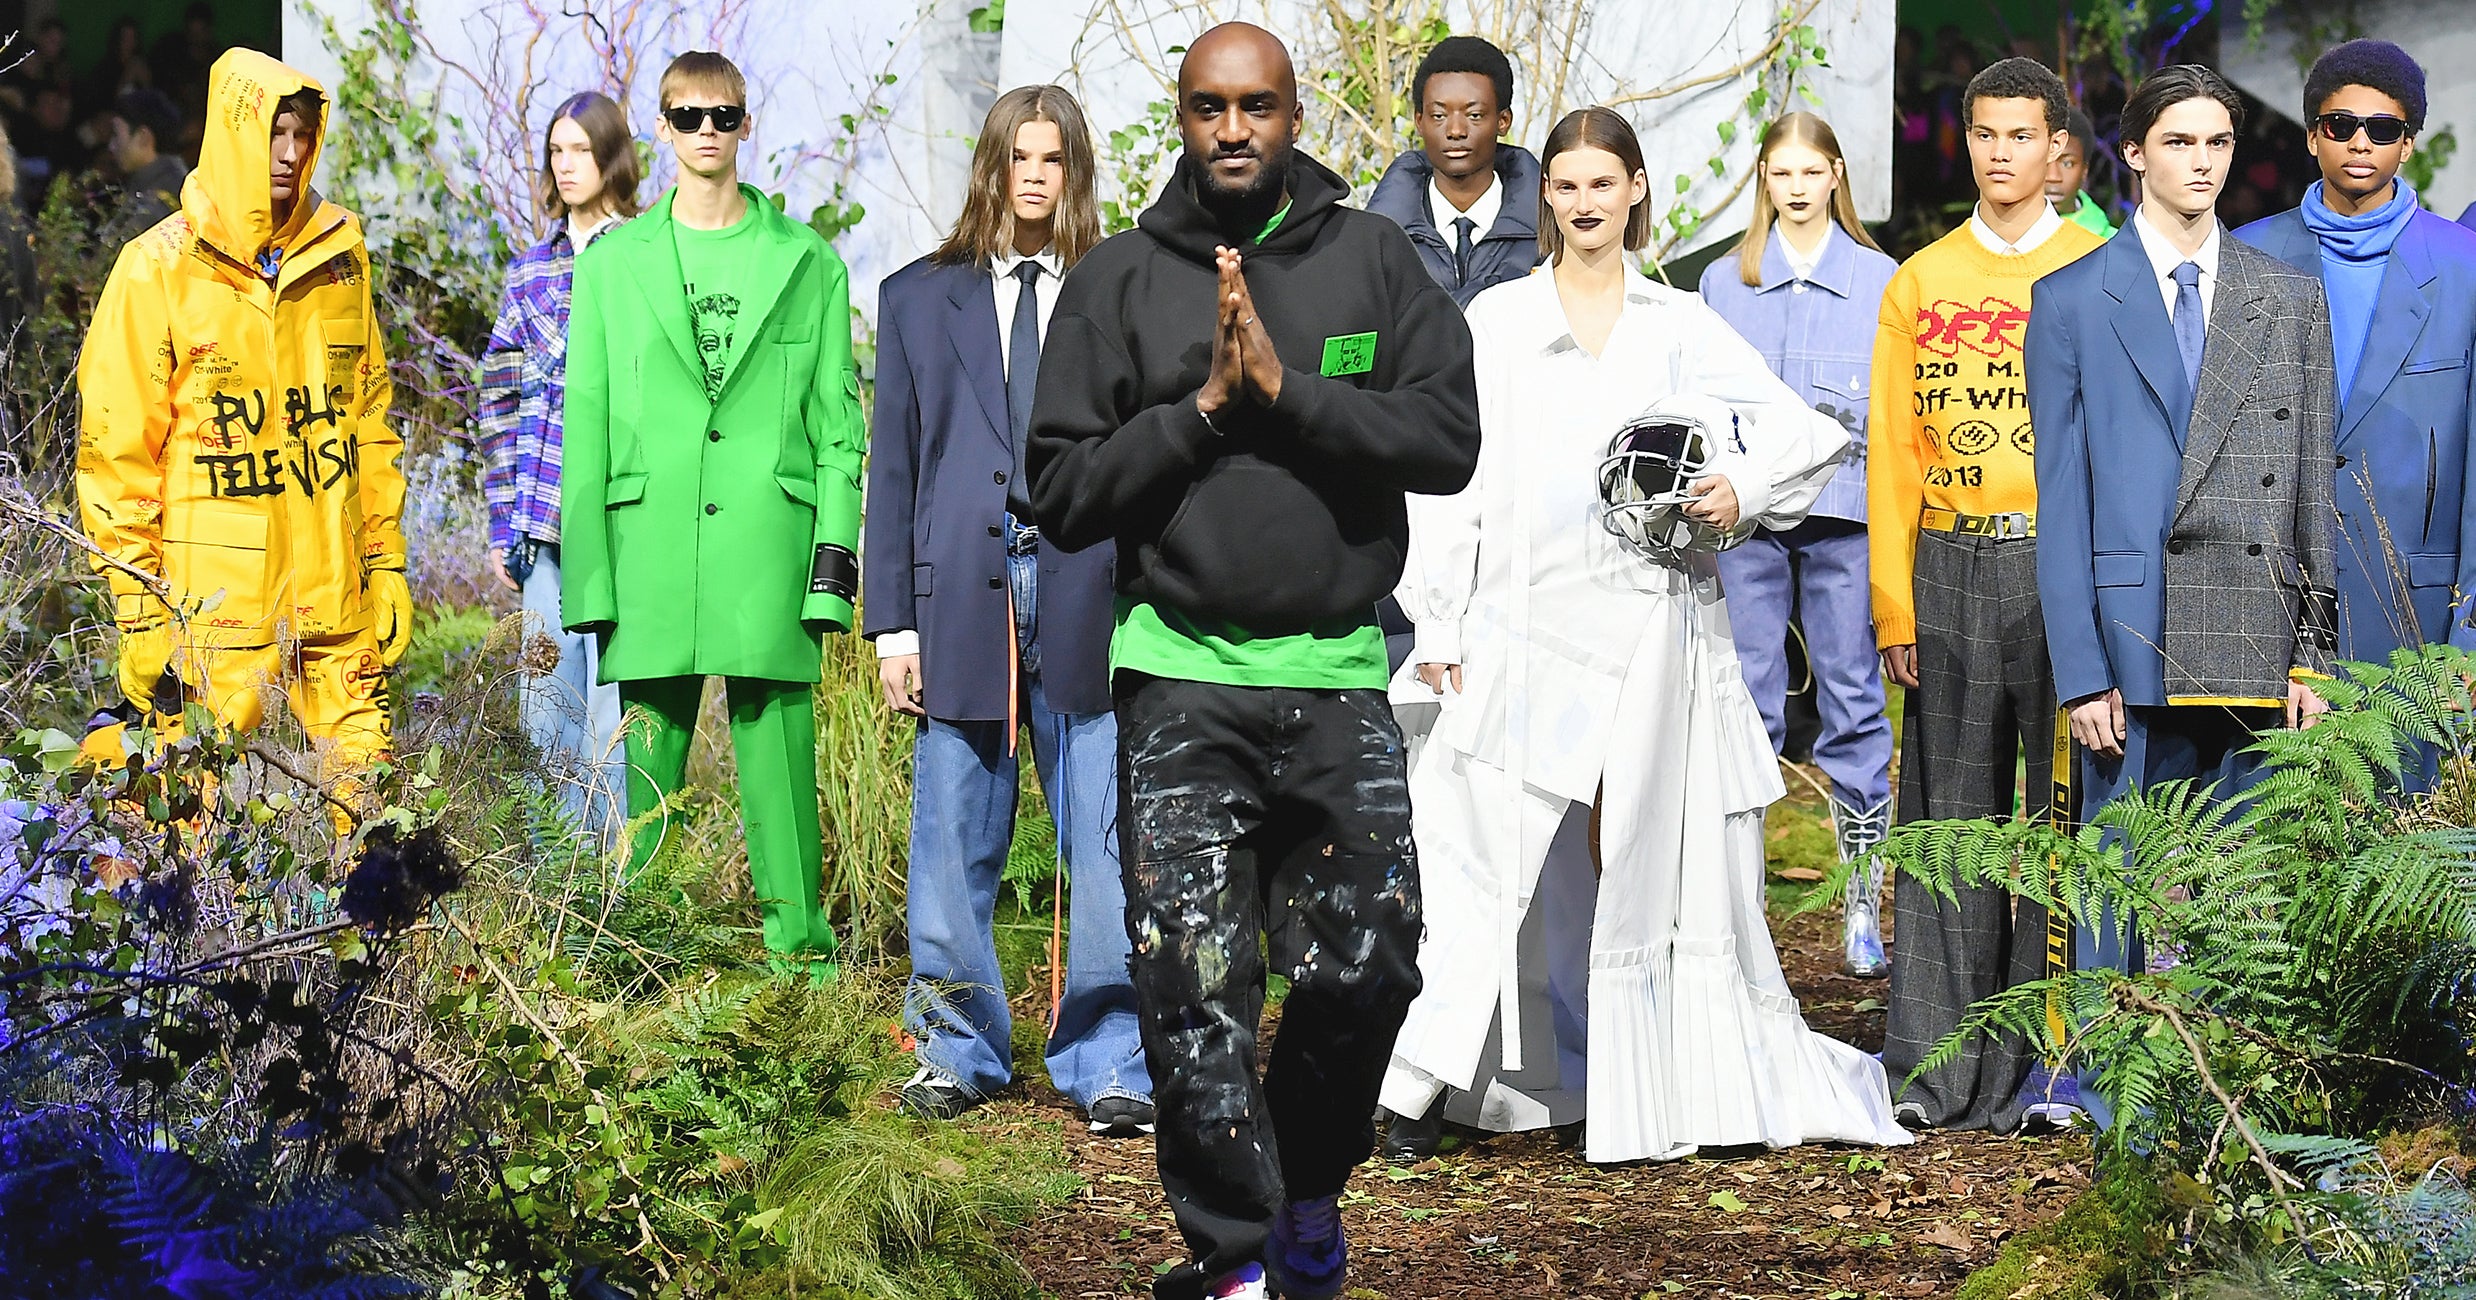 The Living Legacy of Virgil Abloh, Changemaker and Creative Force